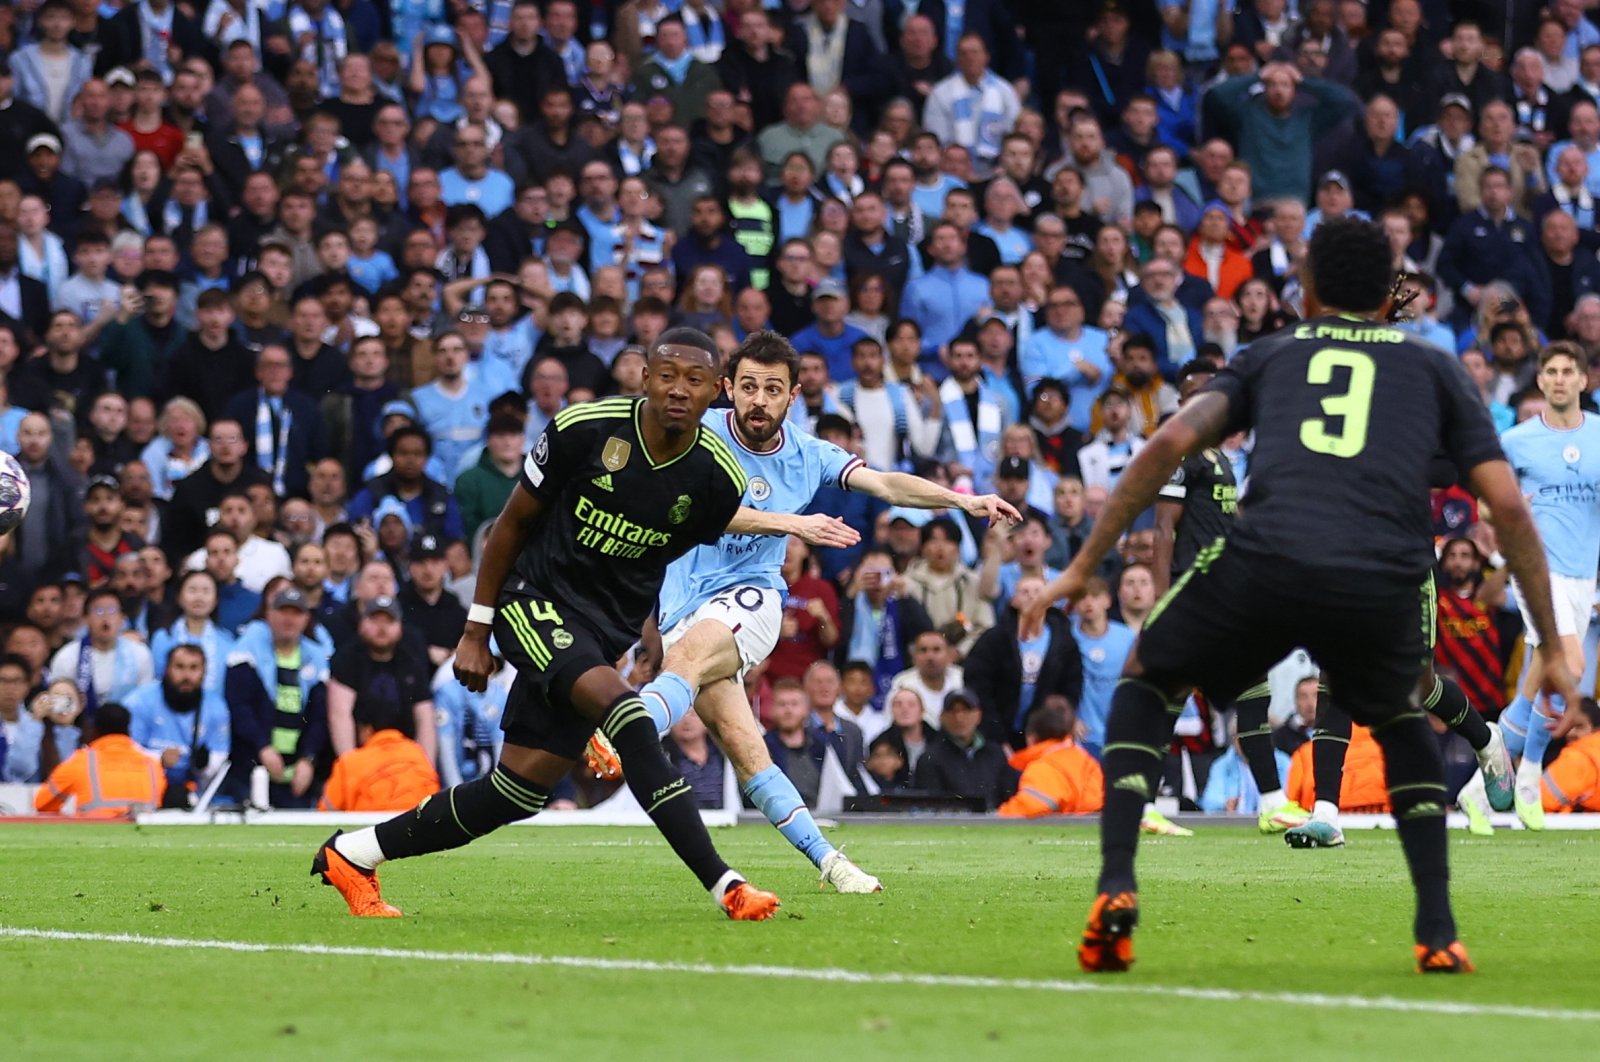 Man City annihilate Real Madrid 4-0 to secure 2nd UCL final spot